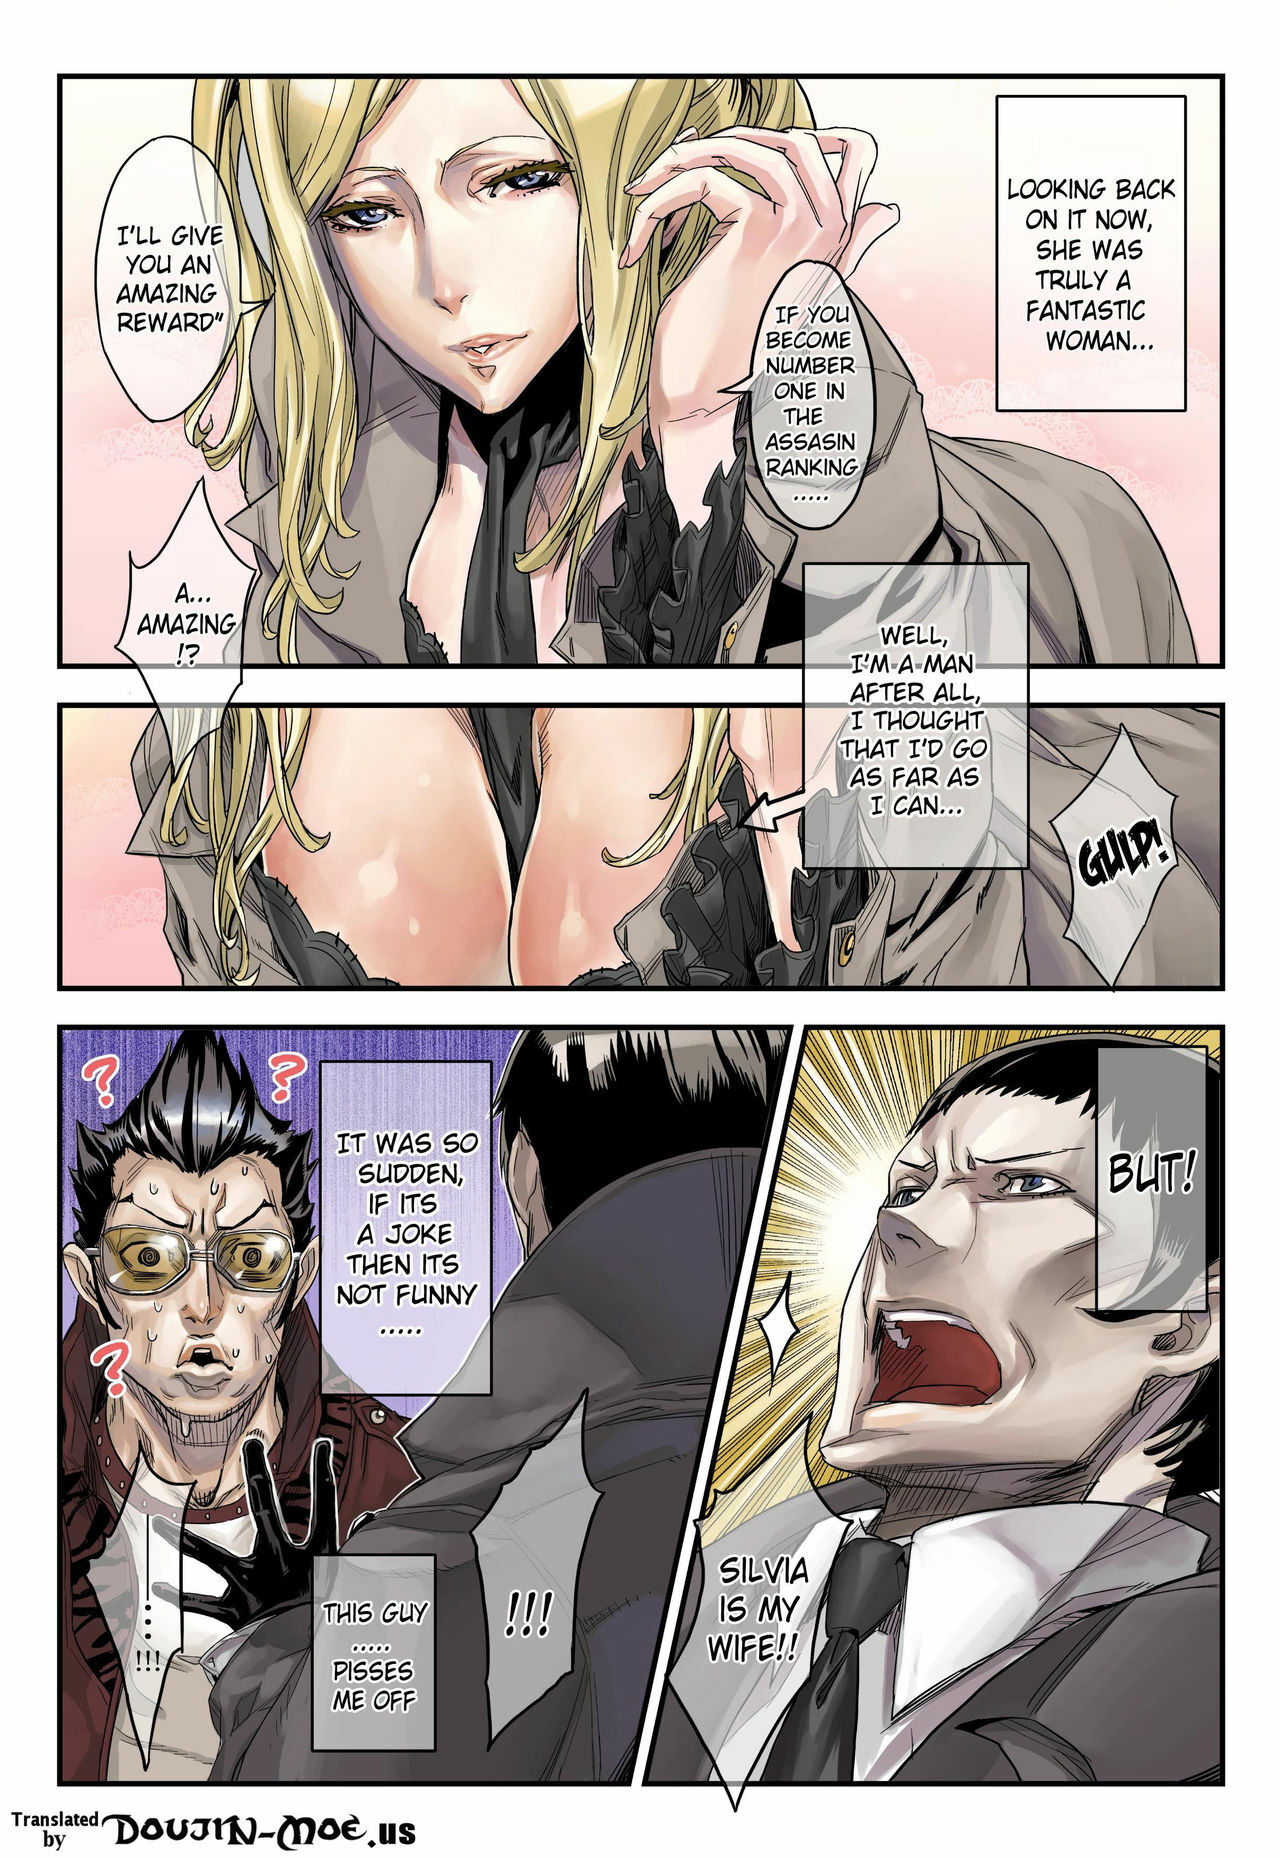 [UNDER CONTROL (zunta)] One More Heroes (NO MORE HEROES) [English] [Doujin-Moe.us] [Digital] page 2 full